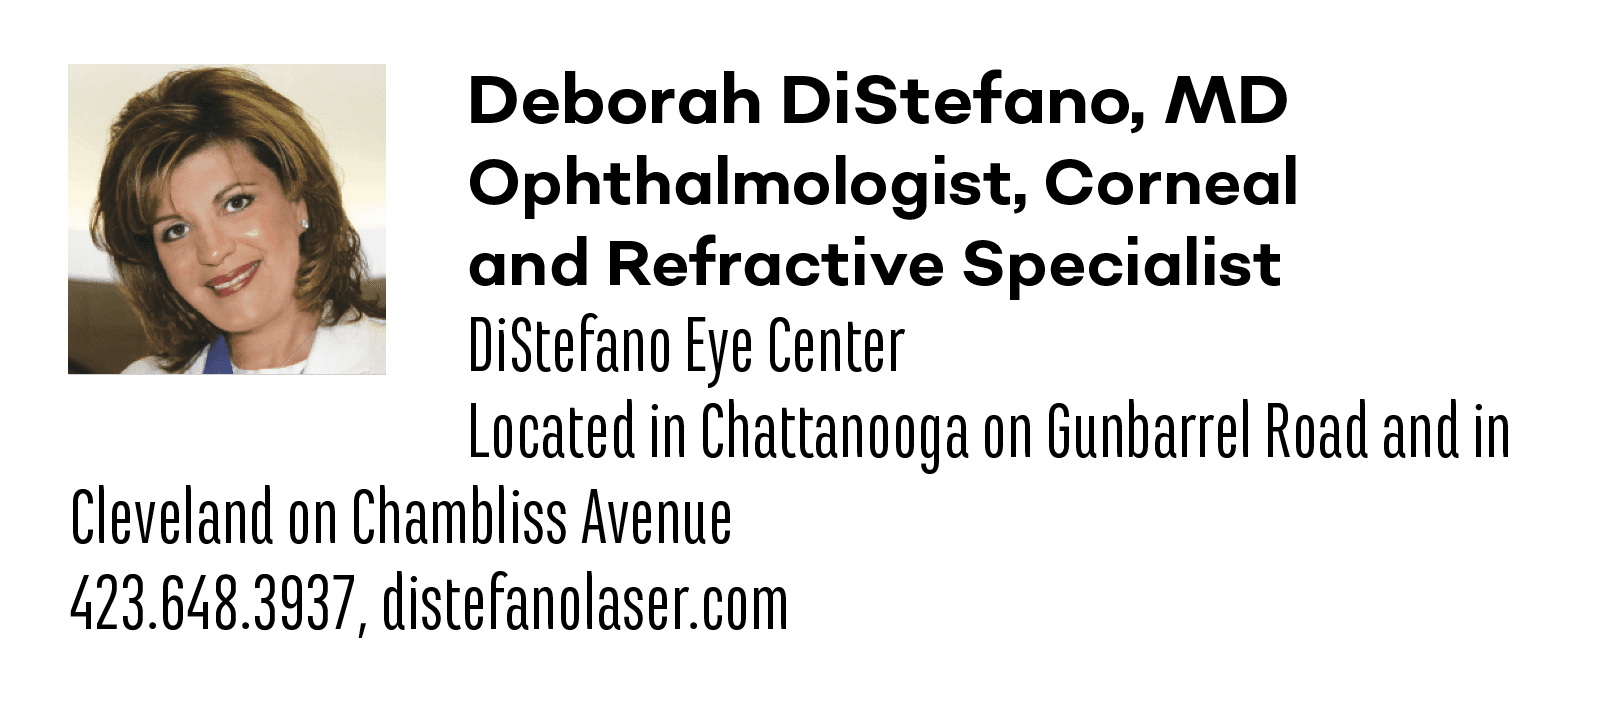 deoborah disetefano, MD ophthalmologist, corneal and refractive specialist from DiStefano eye center in chattanooga